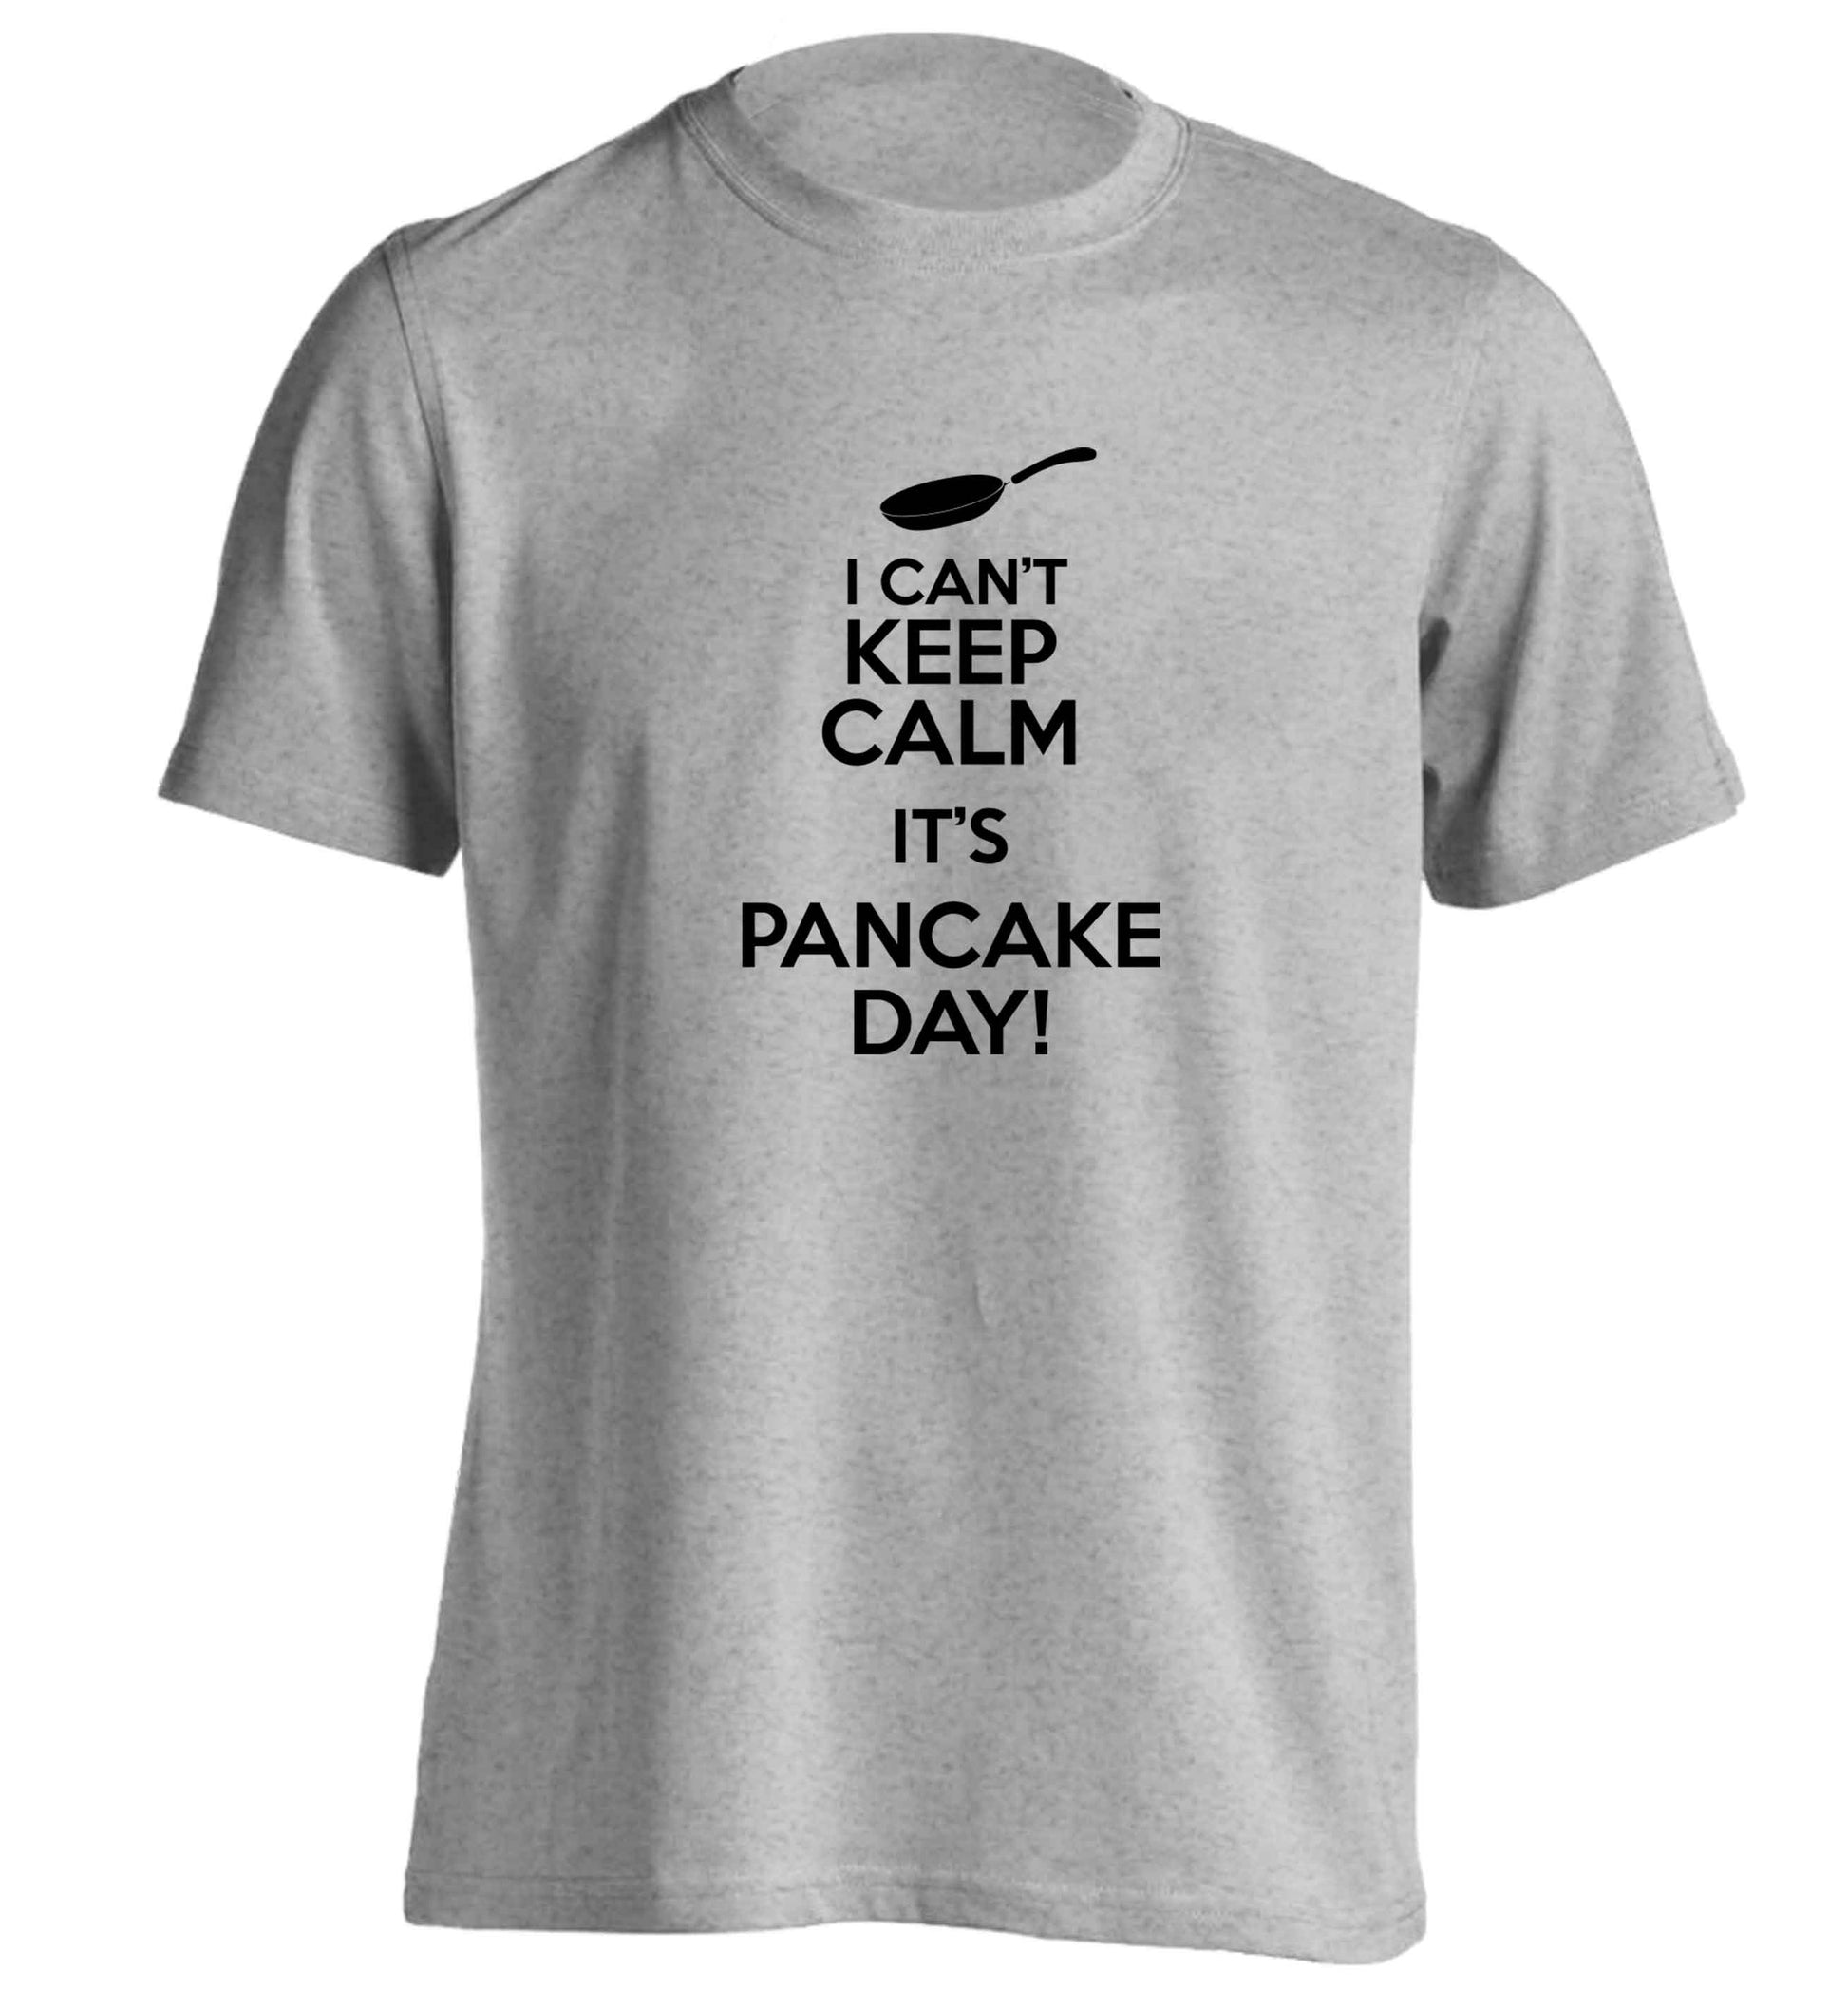 I can't keep calm it's pancake day! adults unisex grey Tshirt 2XL